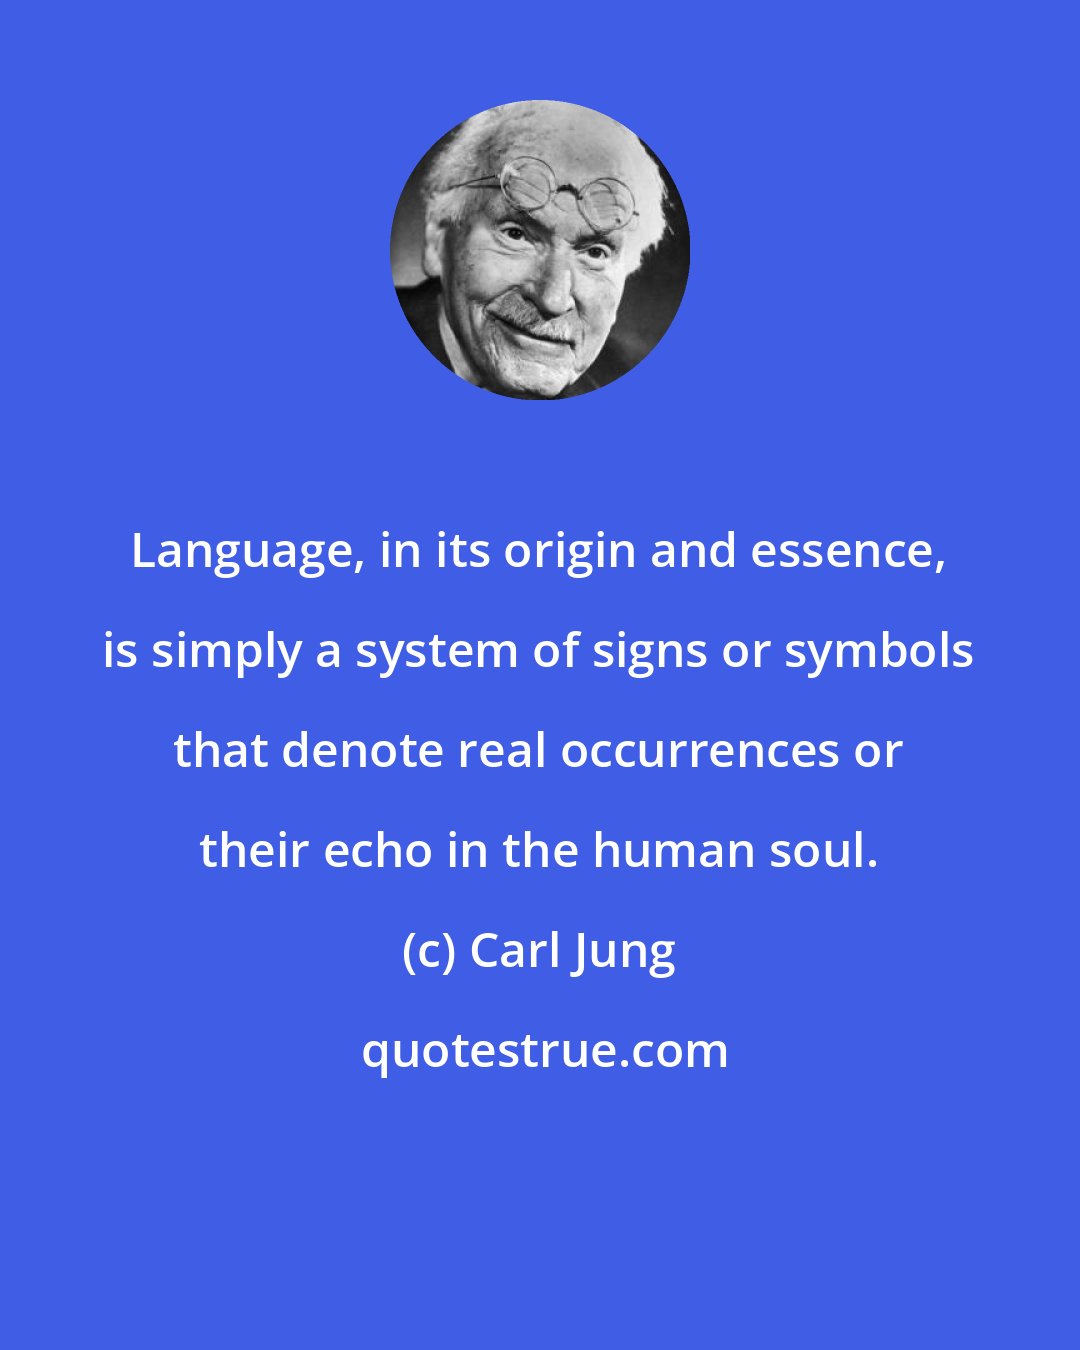 Carl Jung: Language, in its origin and essence, is simply a system of signs or symbols that denote real occurrences or their echo in the human soul.